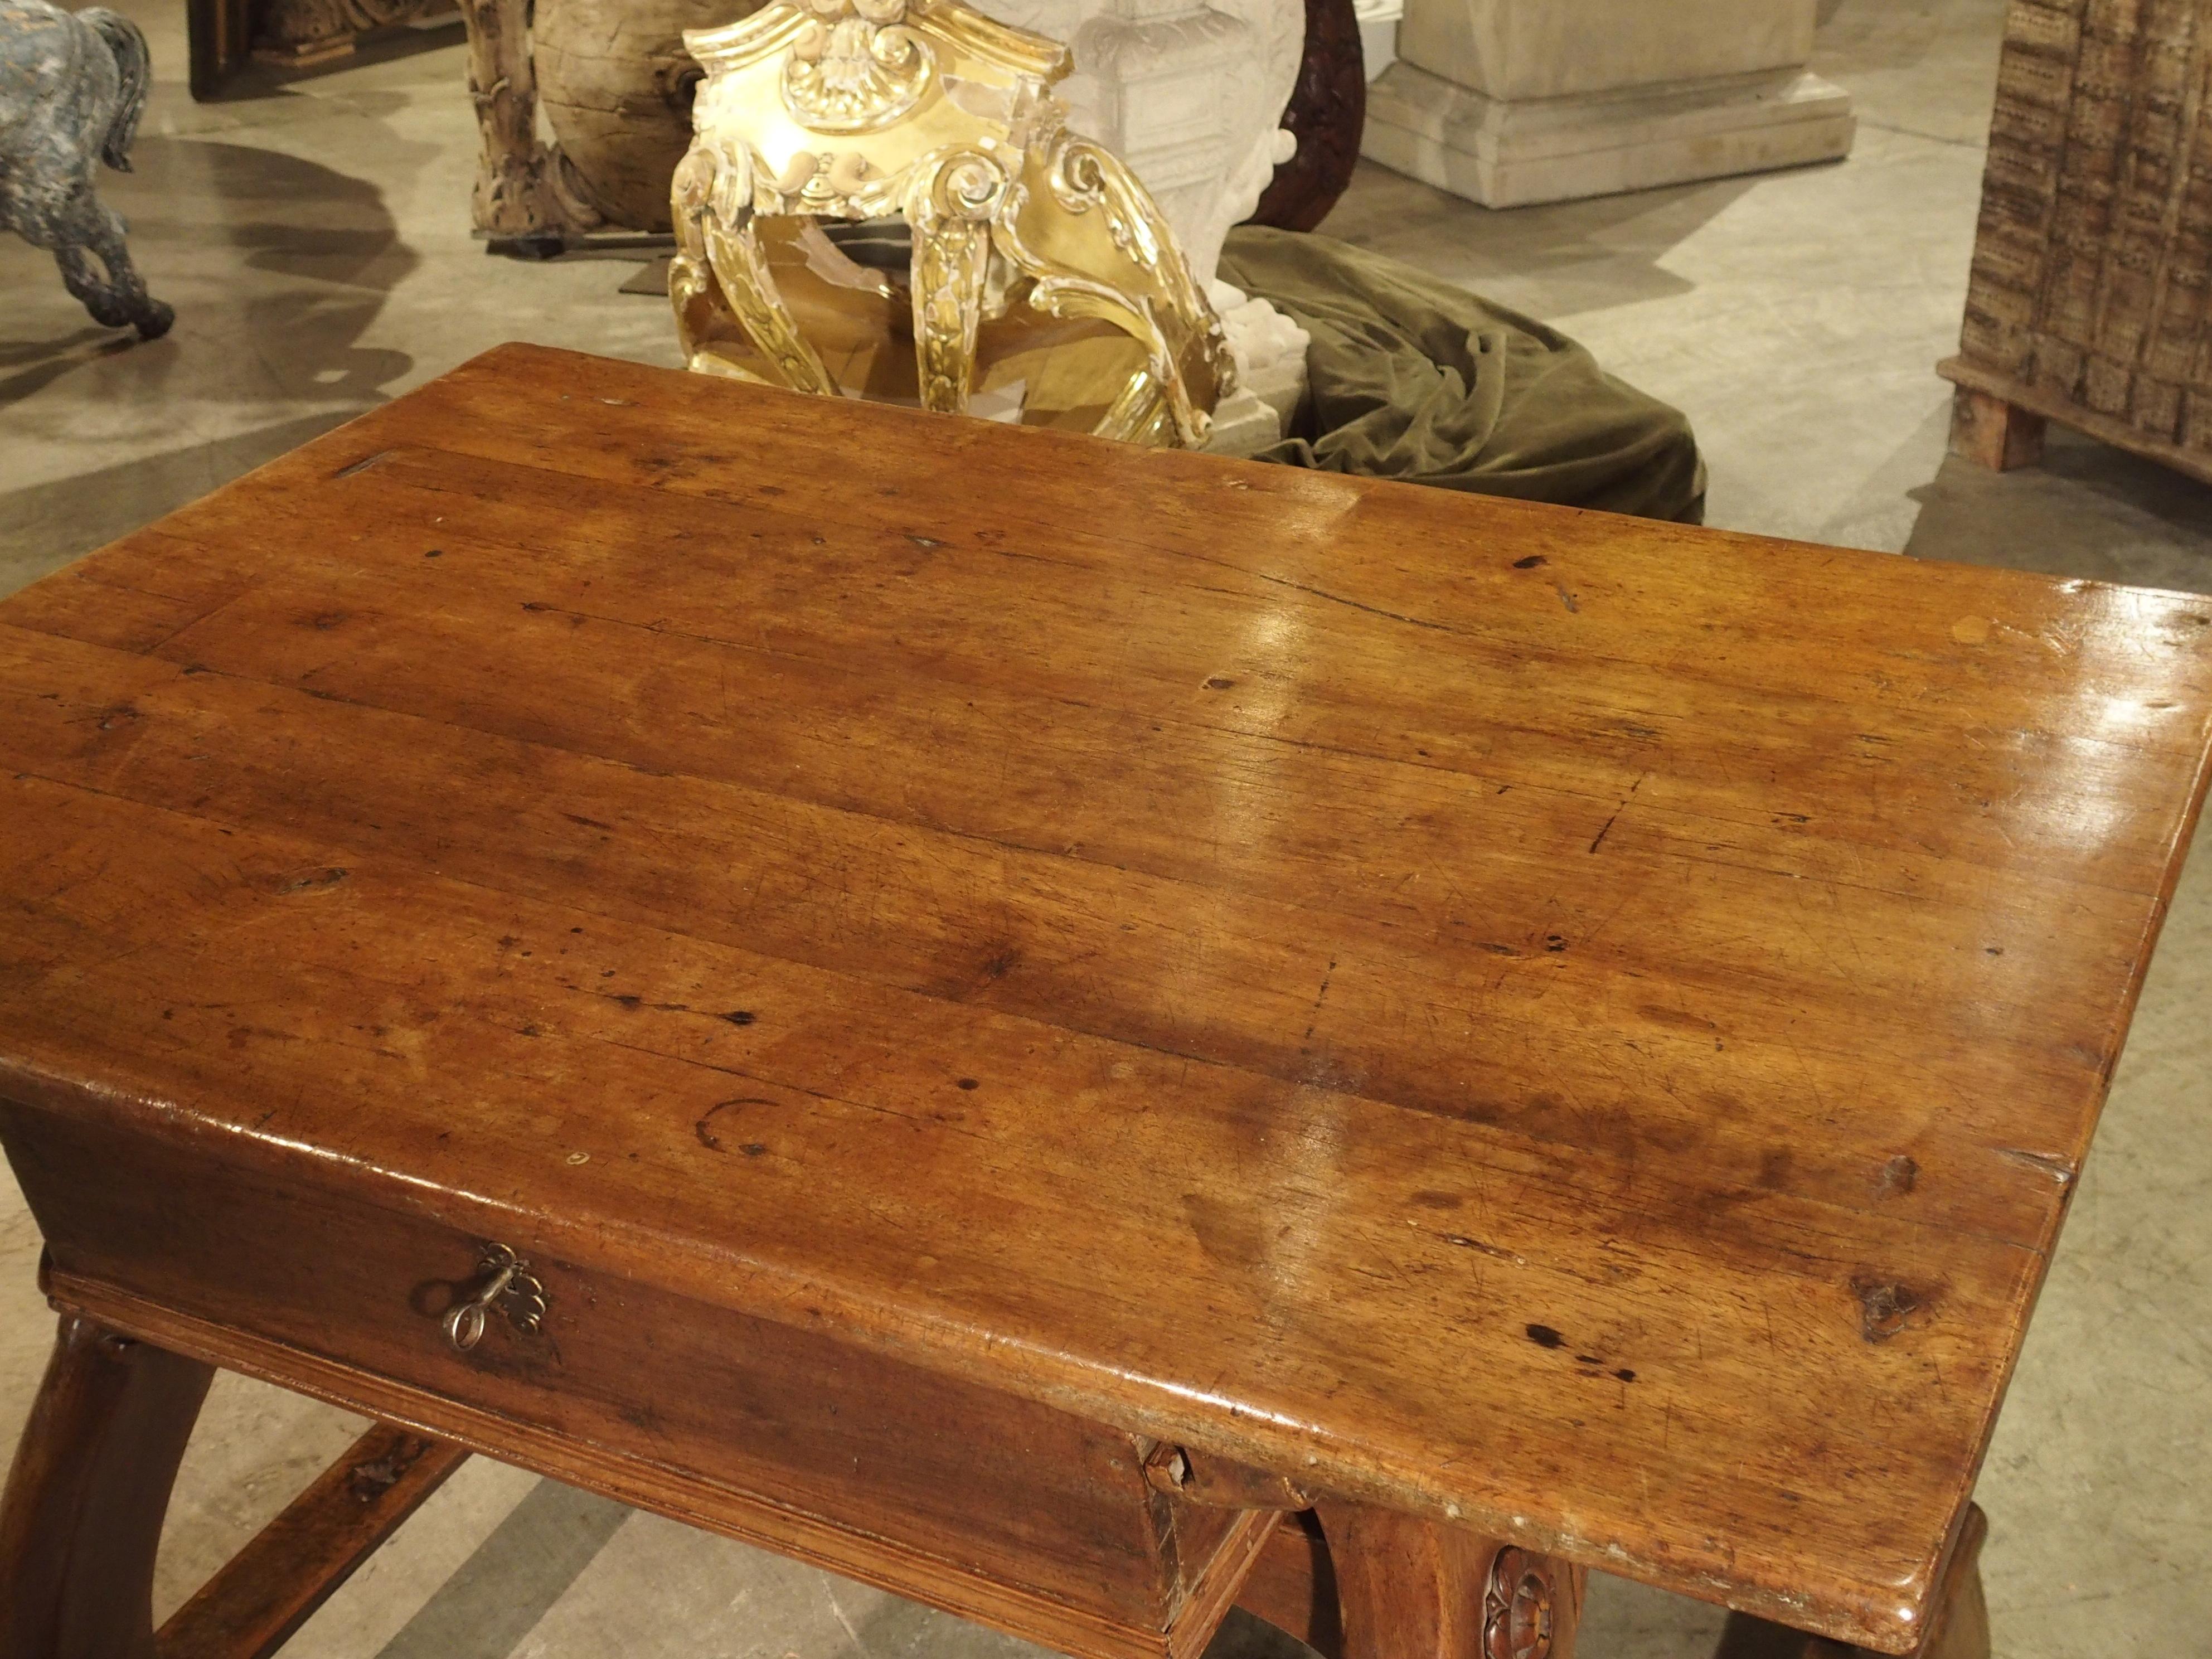 This intriguing table was used to discreetly exchange currencies between the world’s first bankers and their clients. This type of table is first seen in the 1500s, and they were usually either equipped with sliding and locking drawers. This way